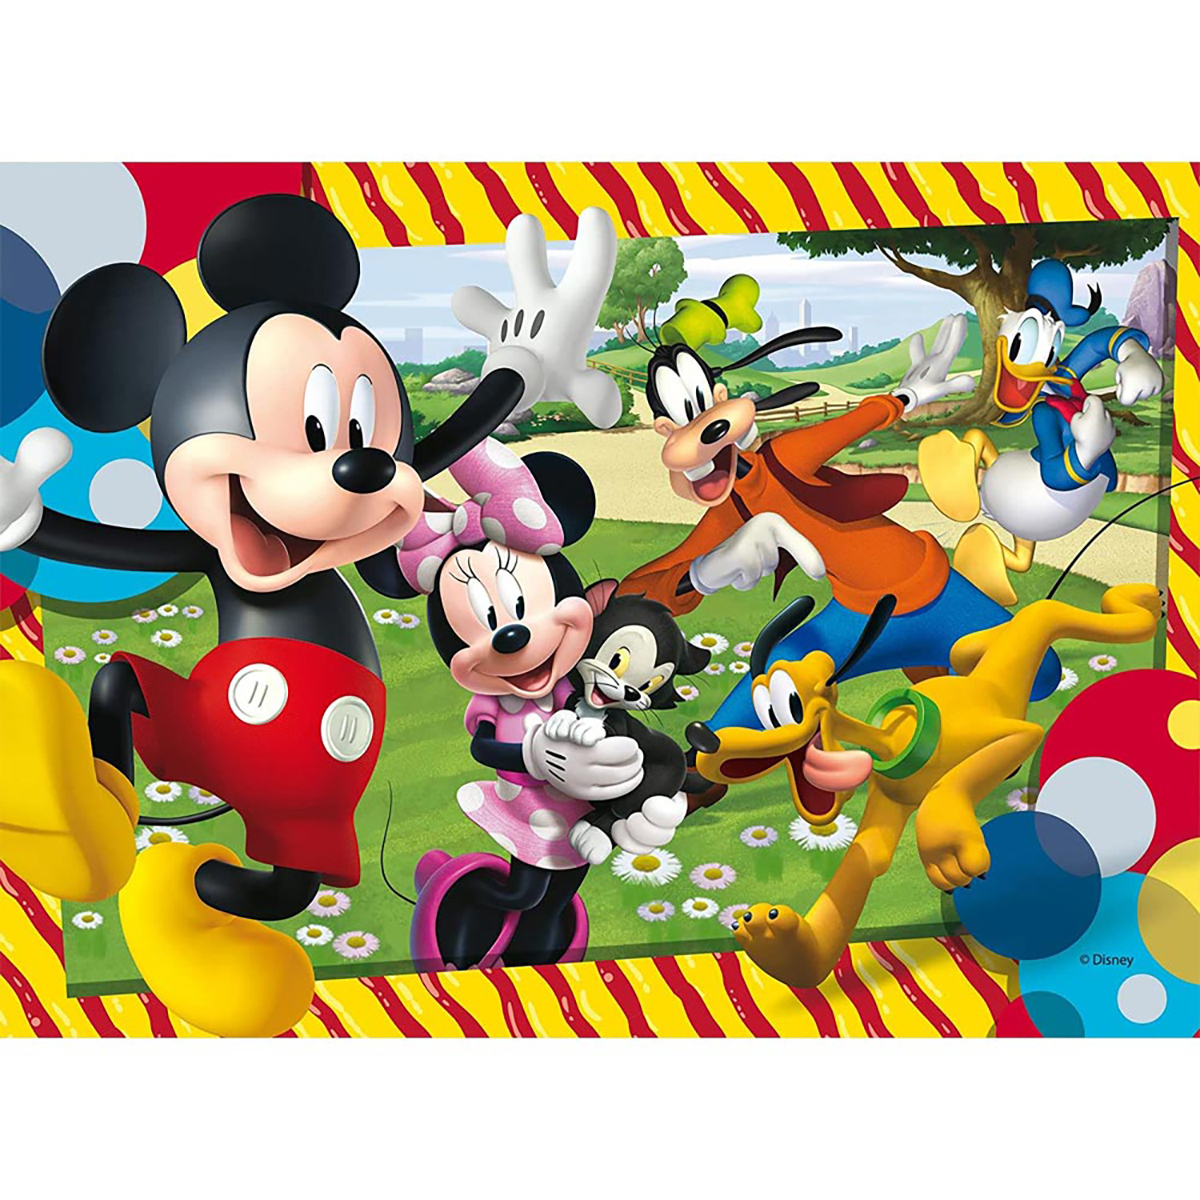 MICKEY MOUSE ECO-Ausmal-Puzzle Teile, Lisciani Maus 60 Puzzle Micky von Boden